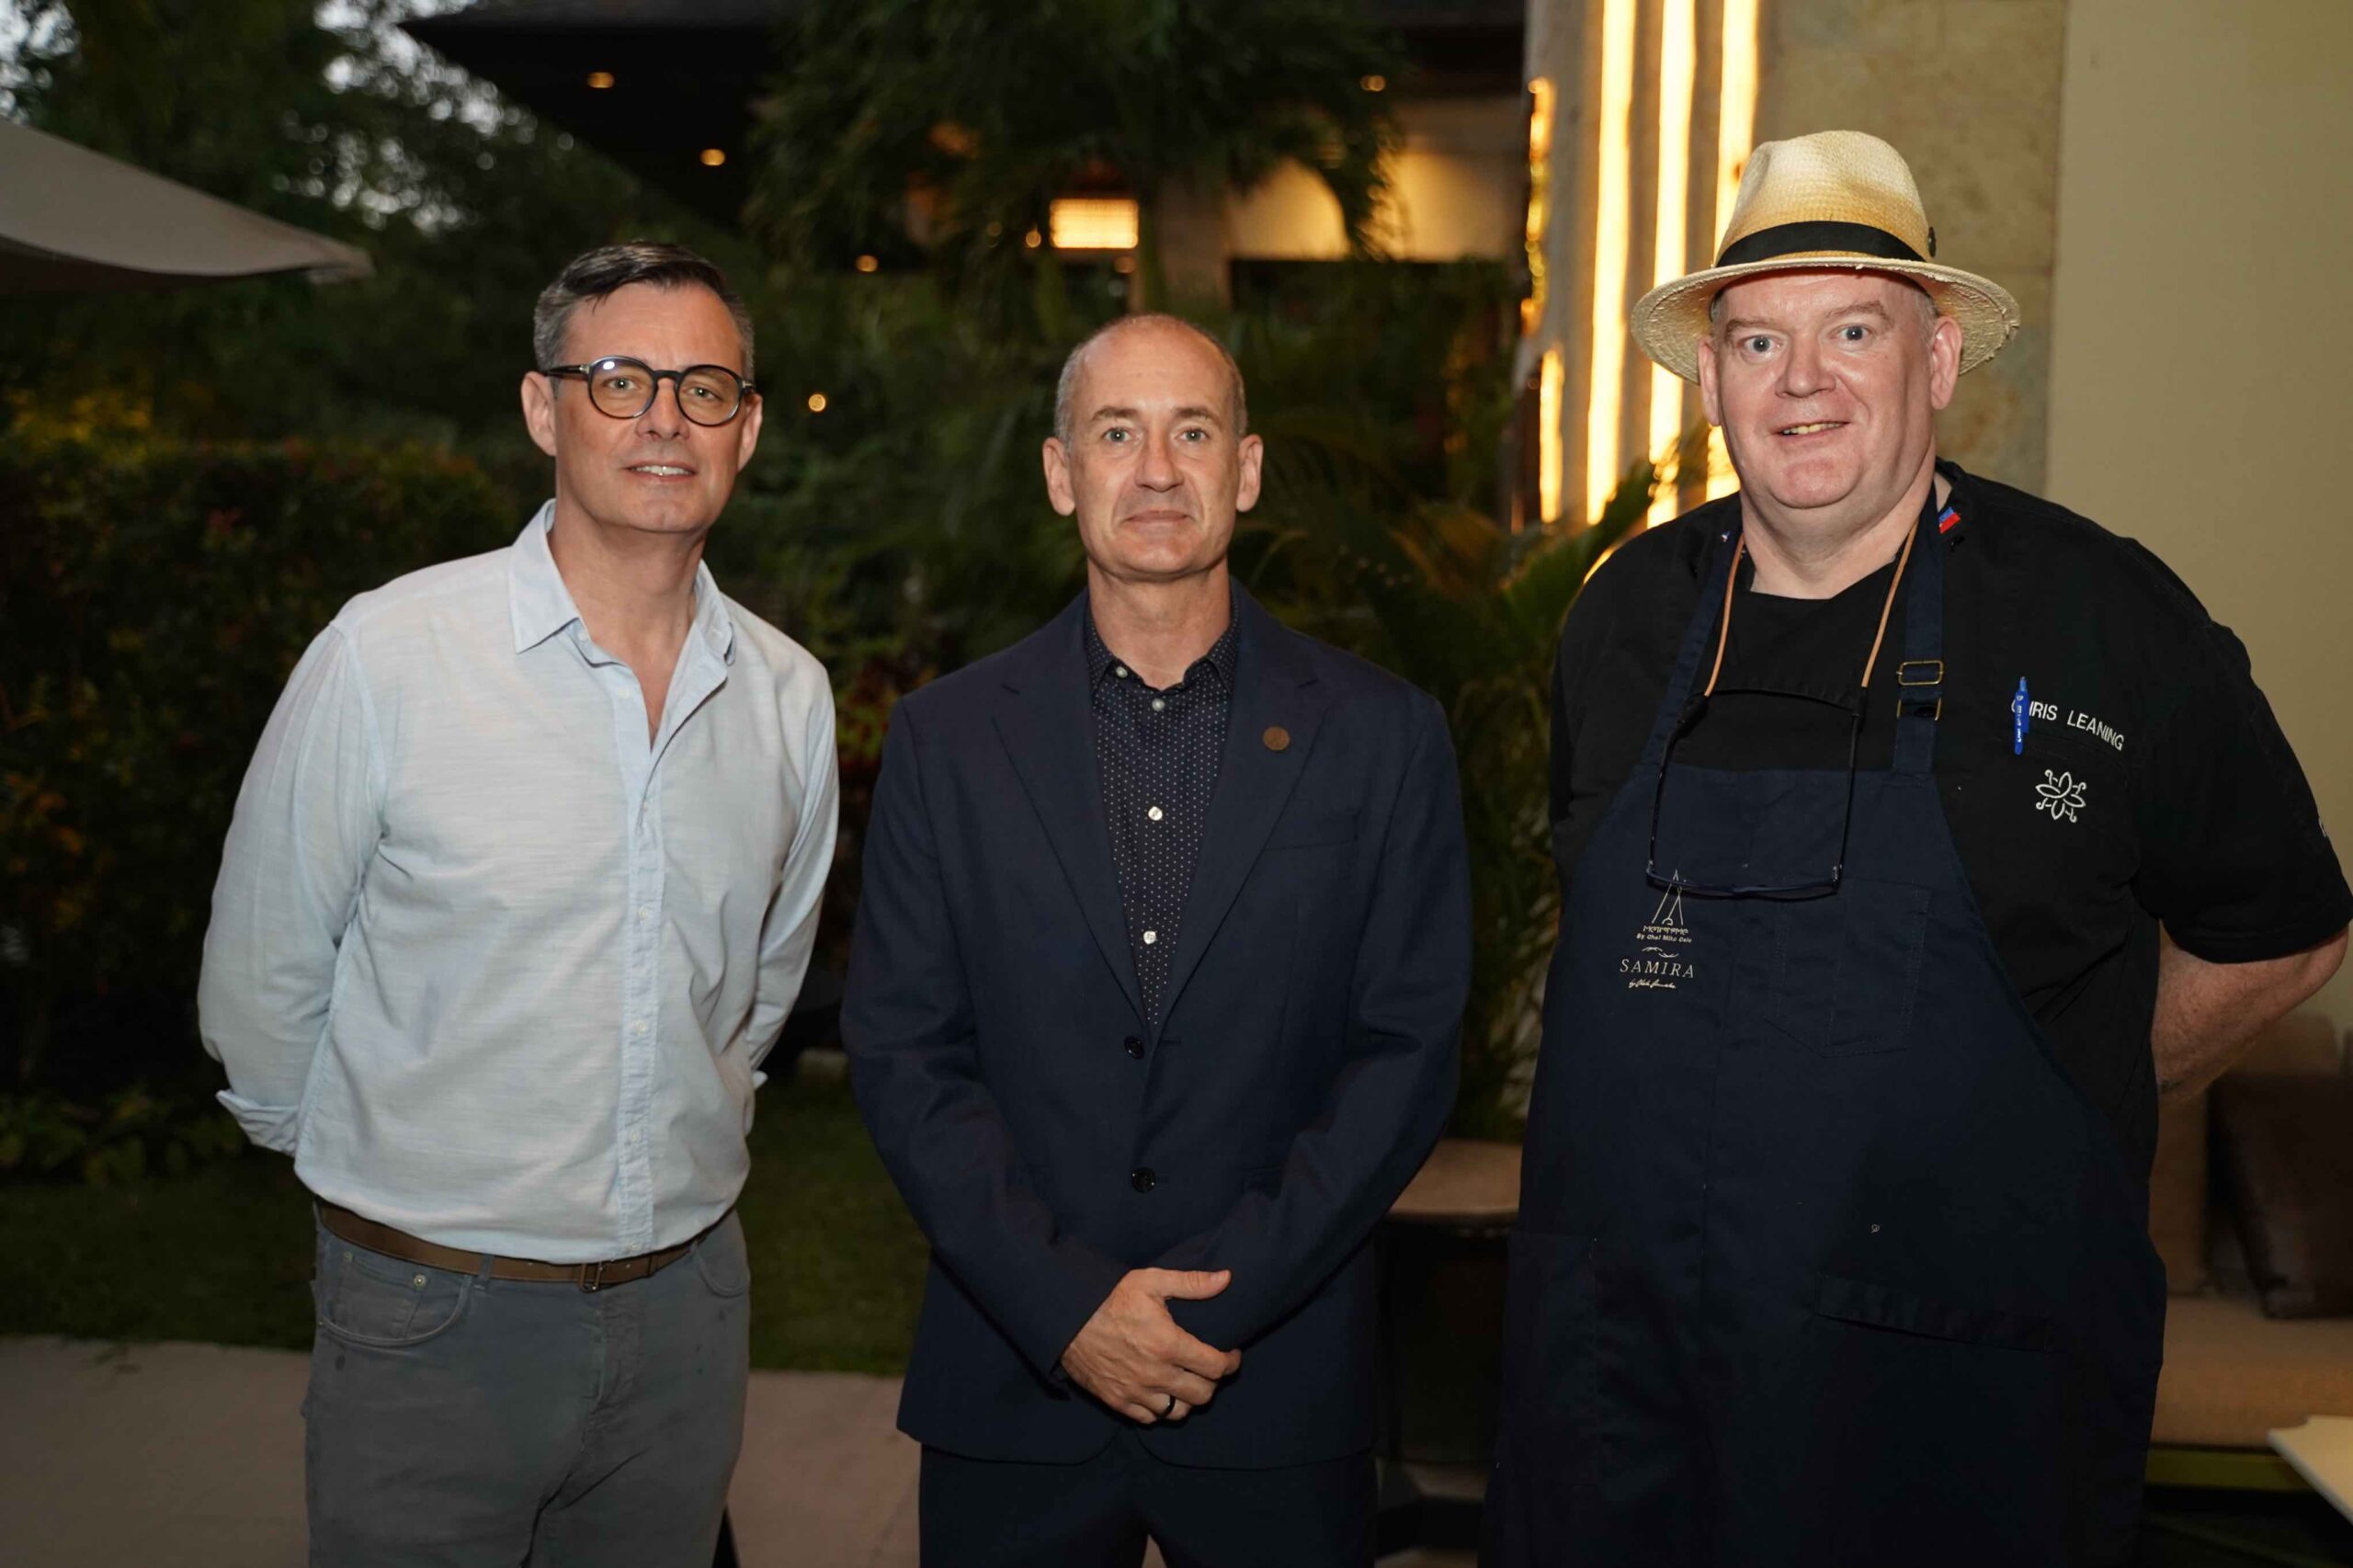 Anya Hospitality Group Hotels and Resorts Managing Director Juan Roca, Anya Resort Tagaytay General Manager Mikel Arriet and Executive Chef Chris Learning